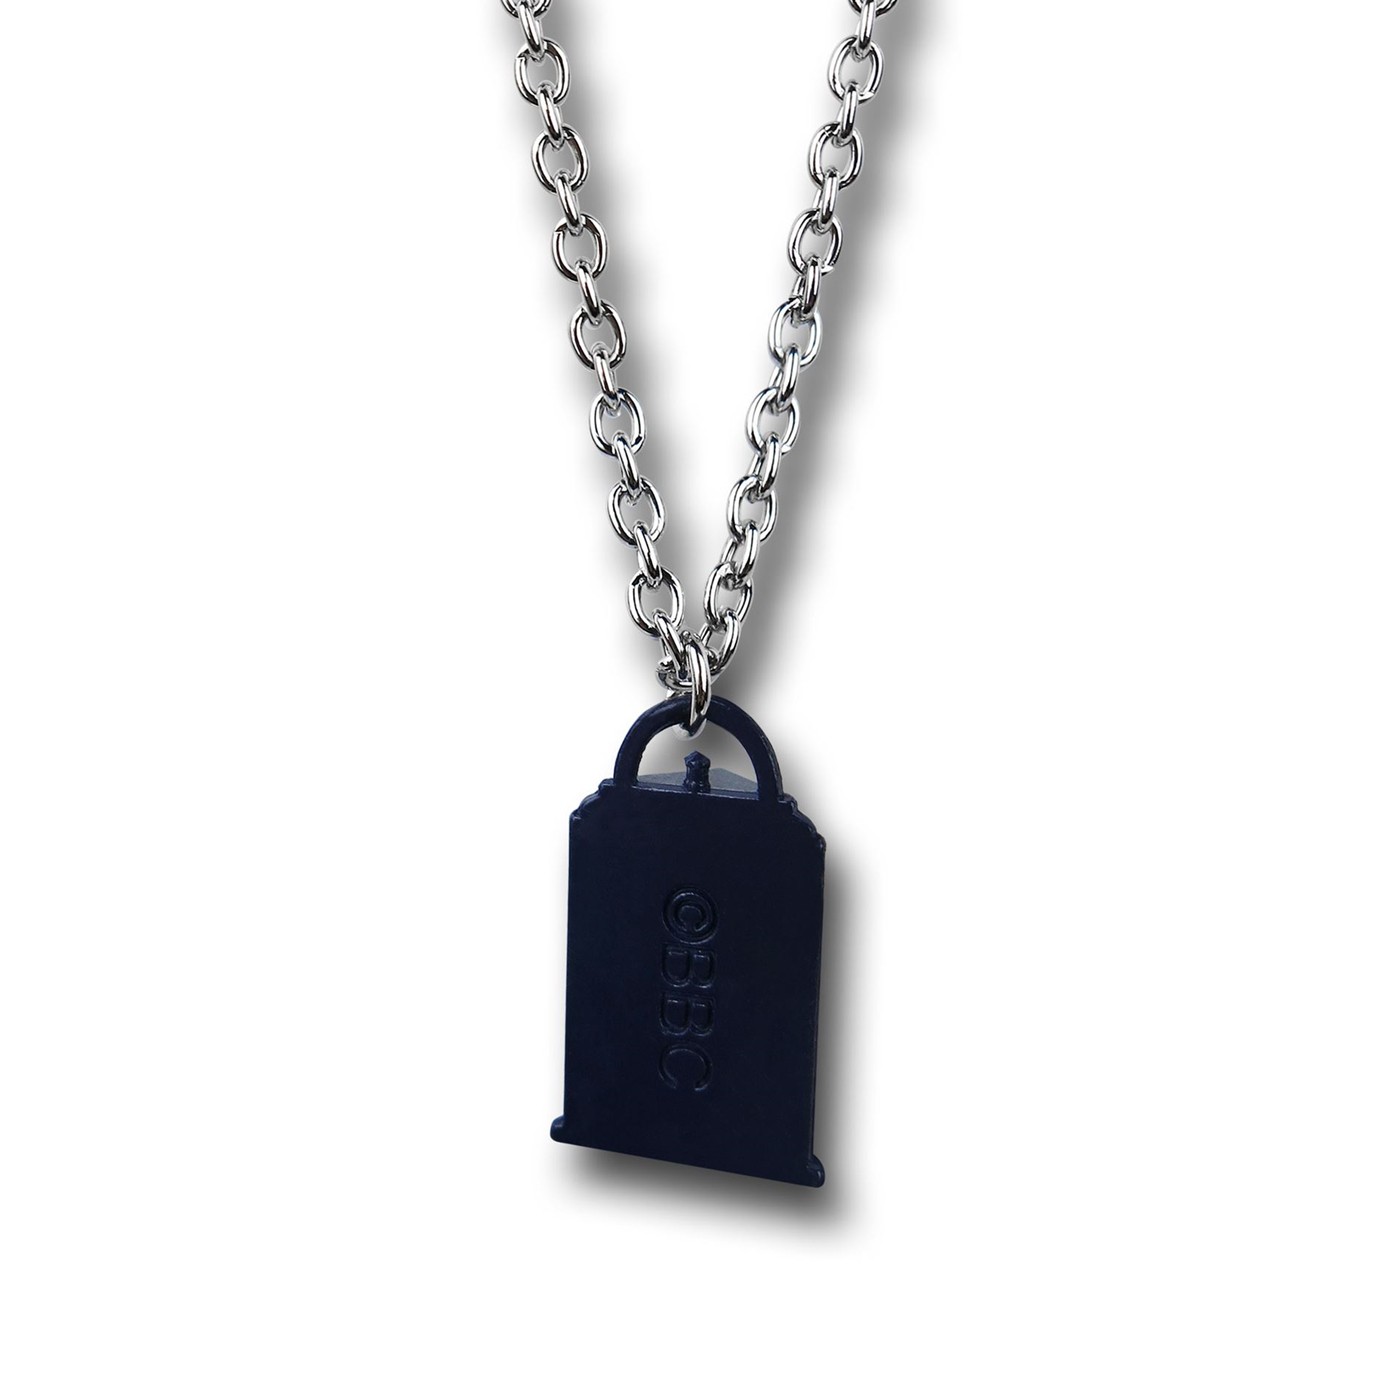 Doctor Who Tardis Necklace